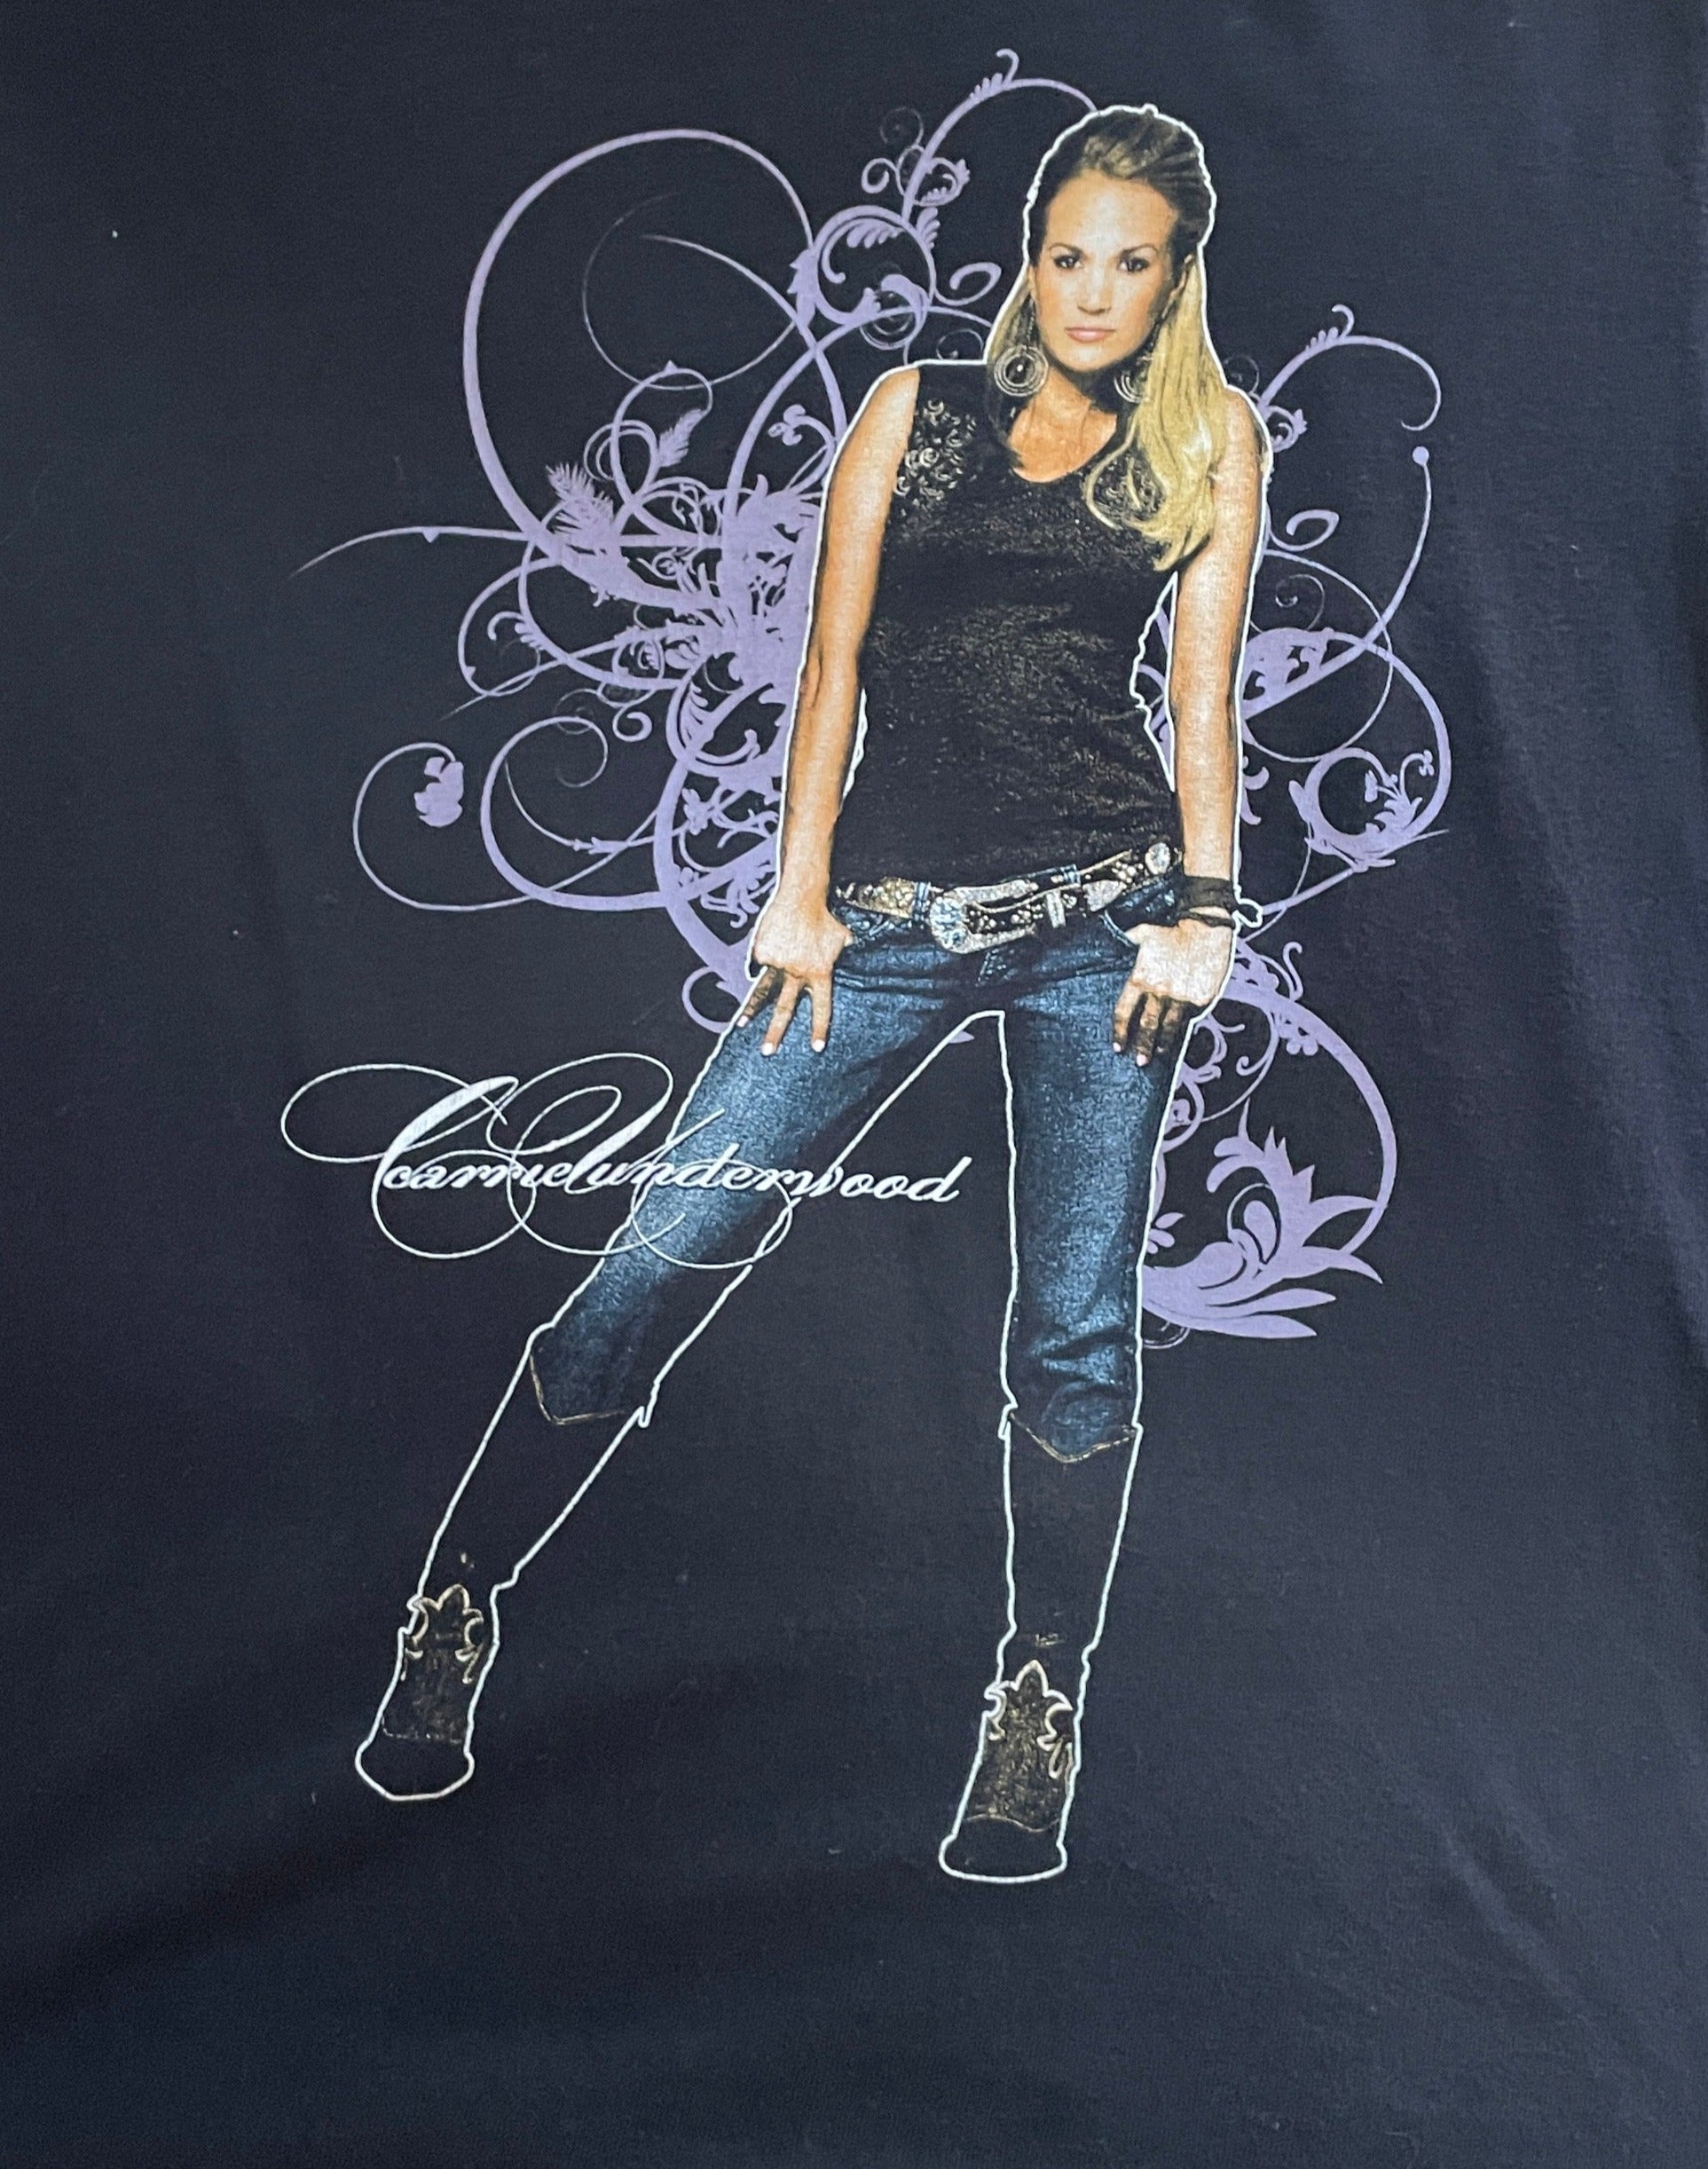 2008 CARRIE UNDERWOOD CARNIVAL RIDE TOUR T-SHIRT